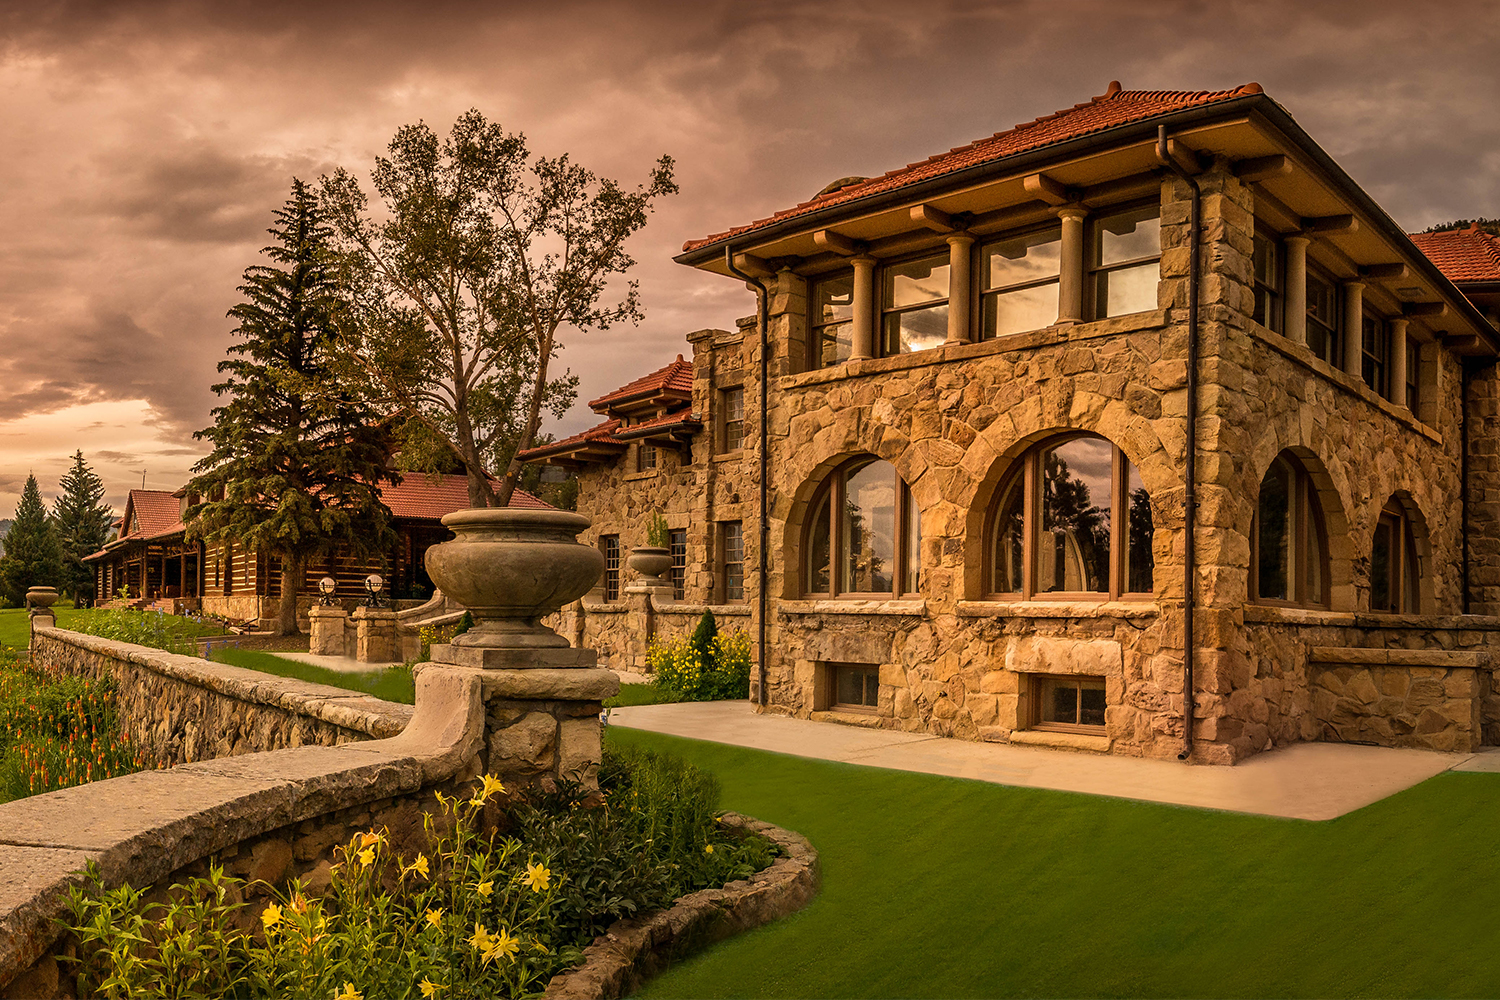 The Casa Grande mansion at Vermejo, one of the best luxury ranch resorts in the U.S.